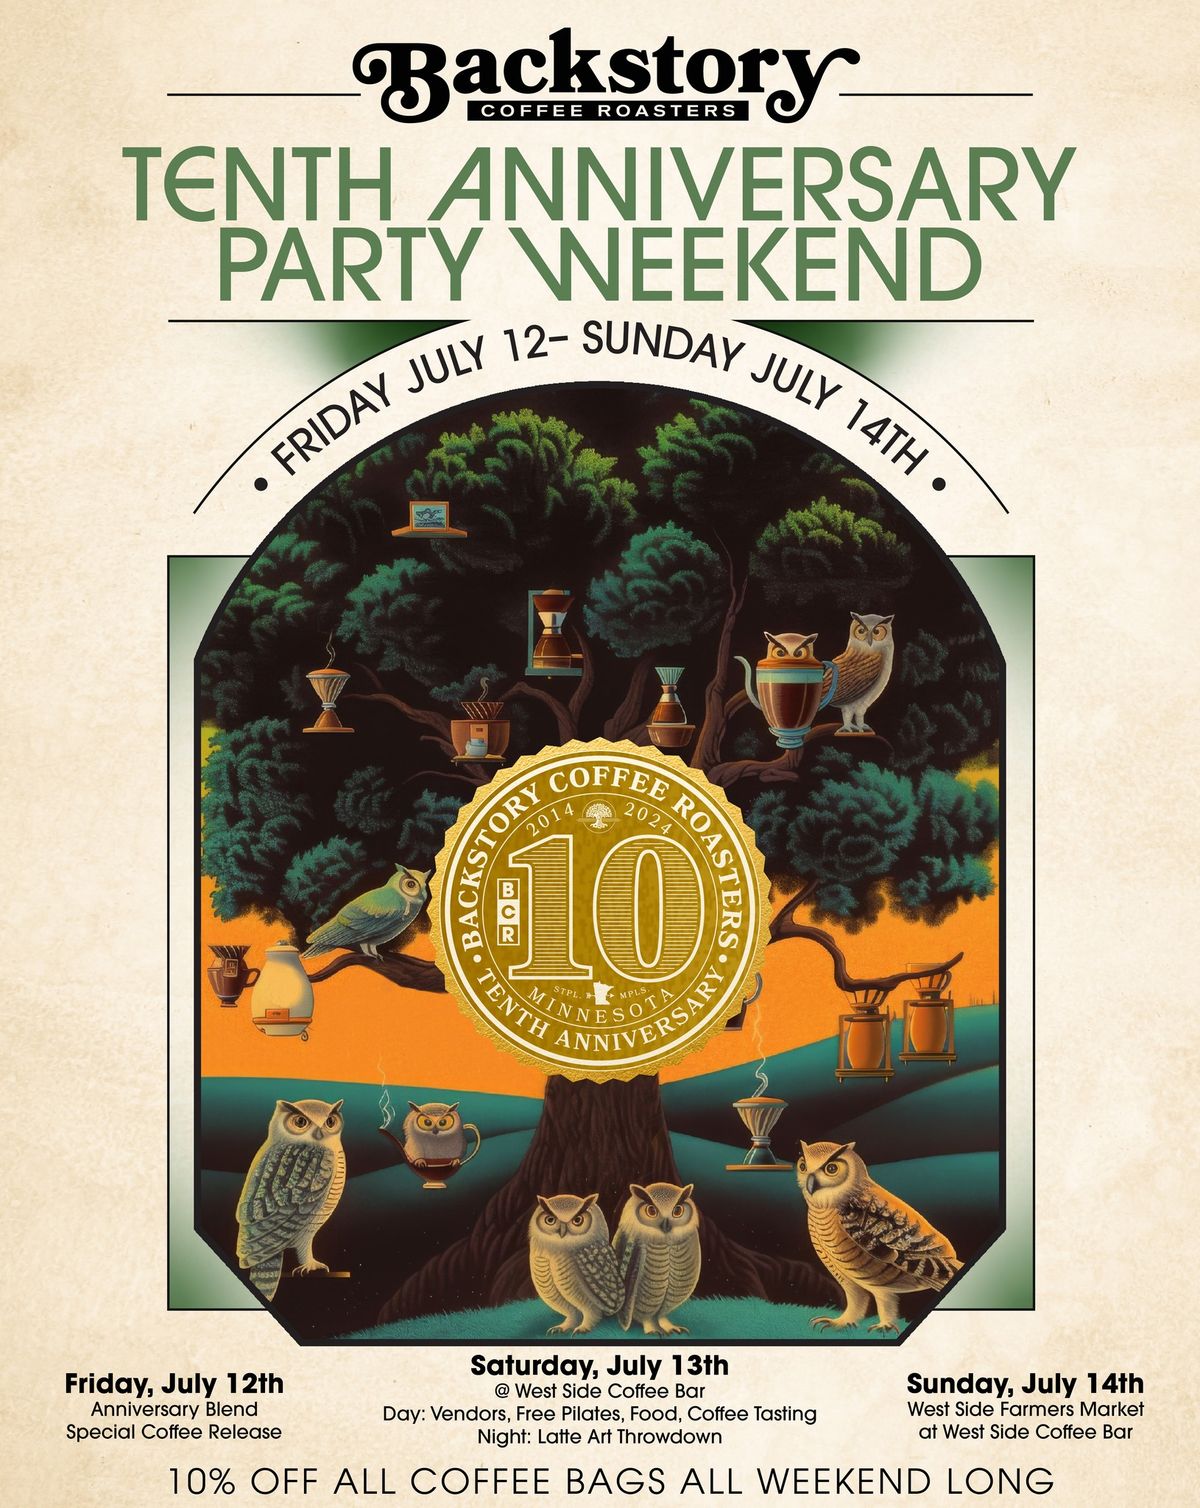 Backstory's Tenth Anniversary Party Weekend